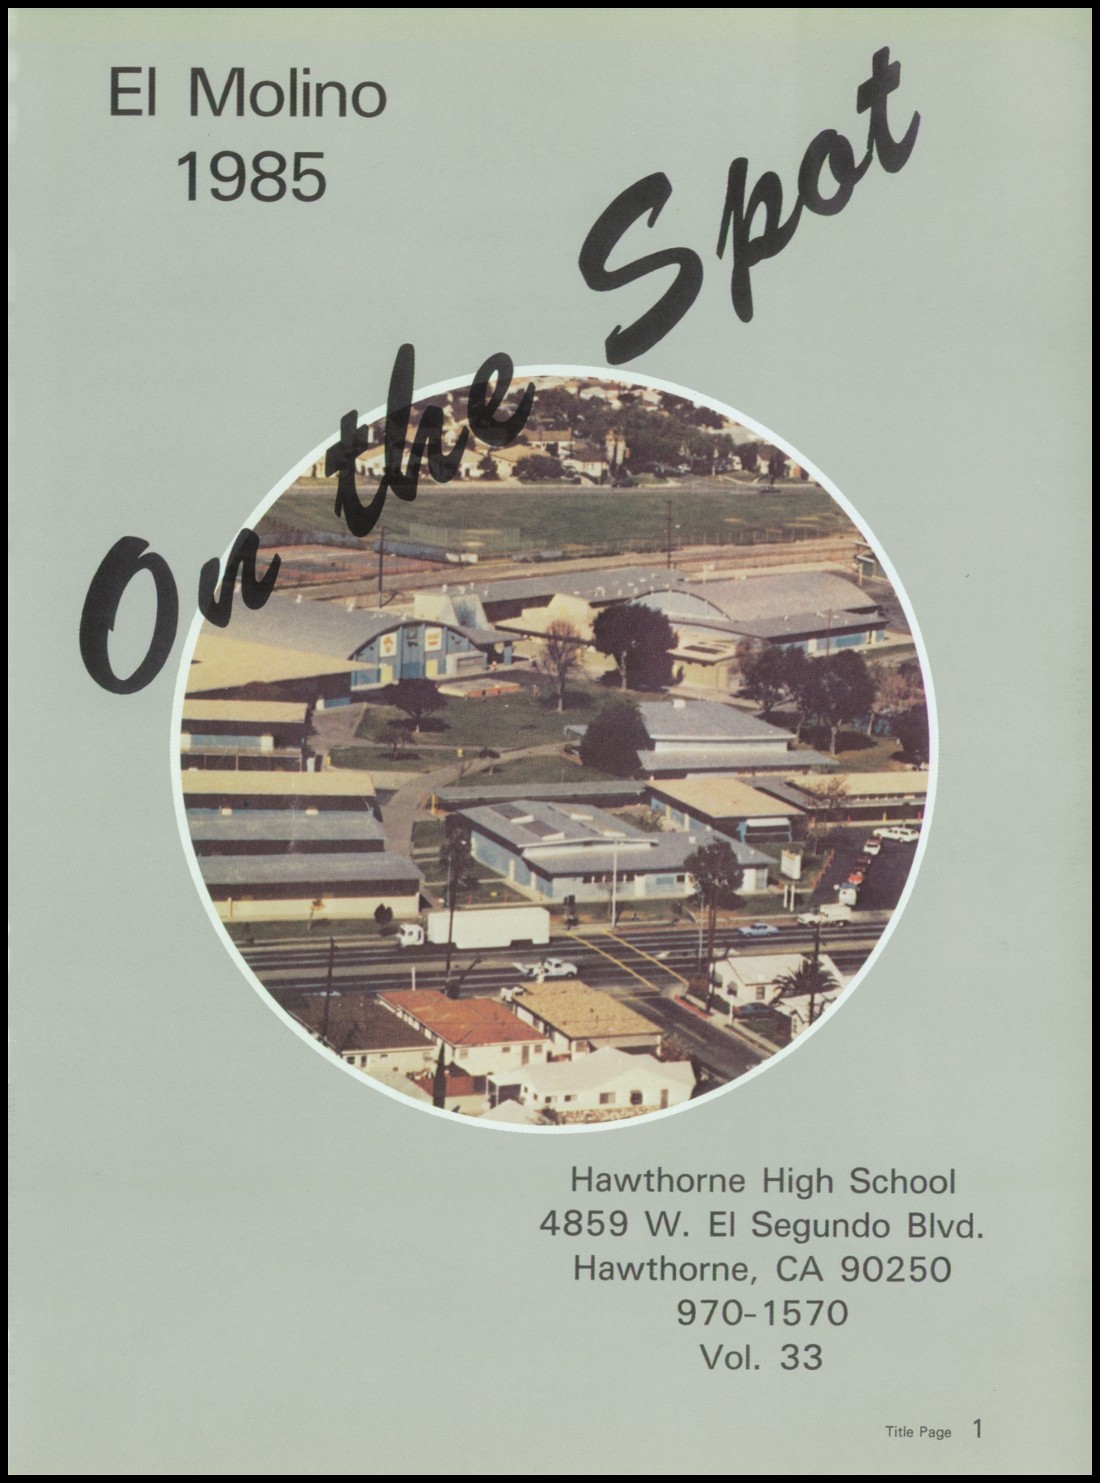 1985 yearbook from Hawthorne High School from Hawthorne, California